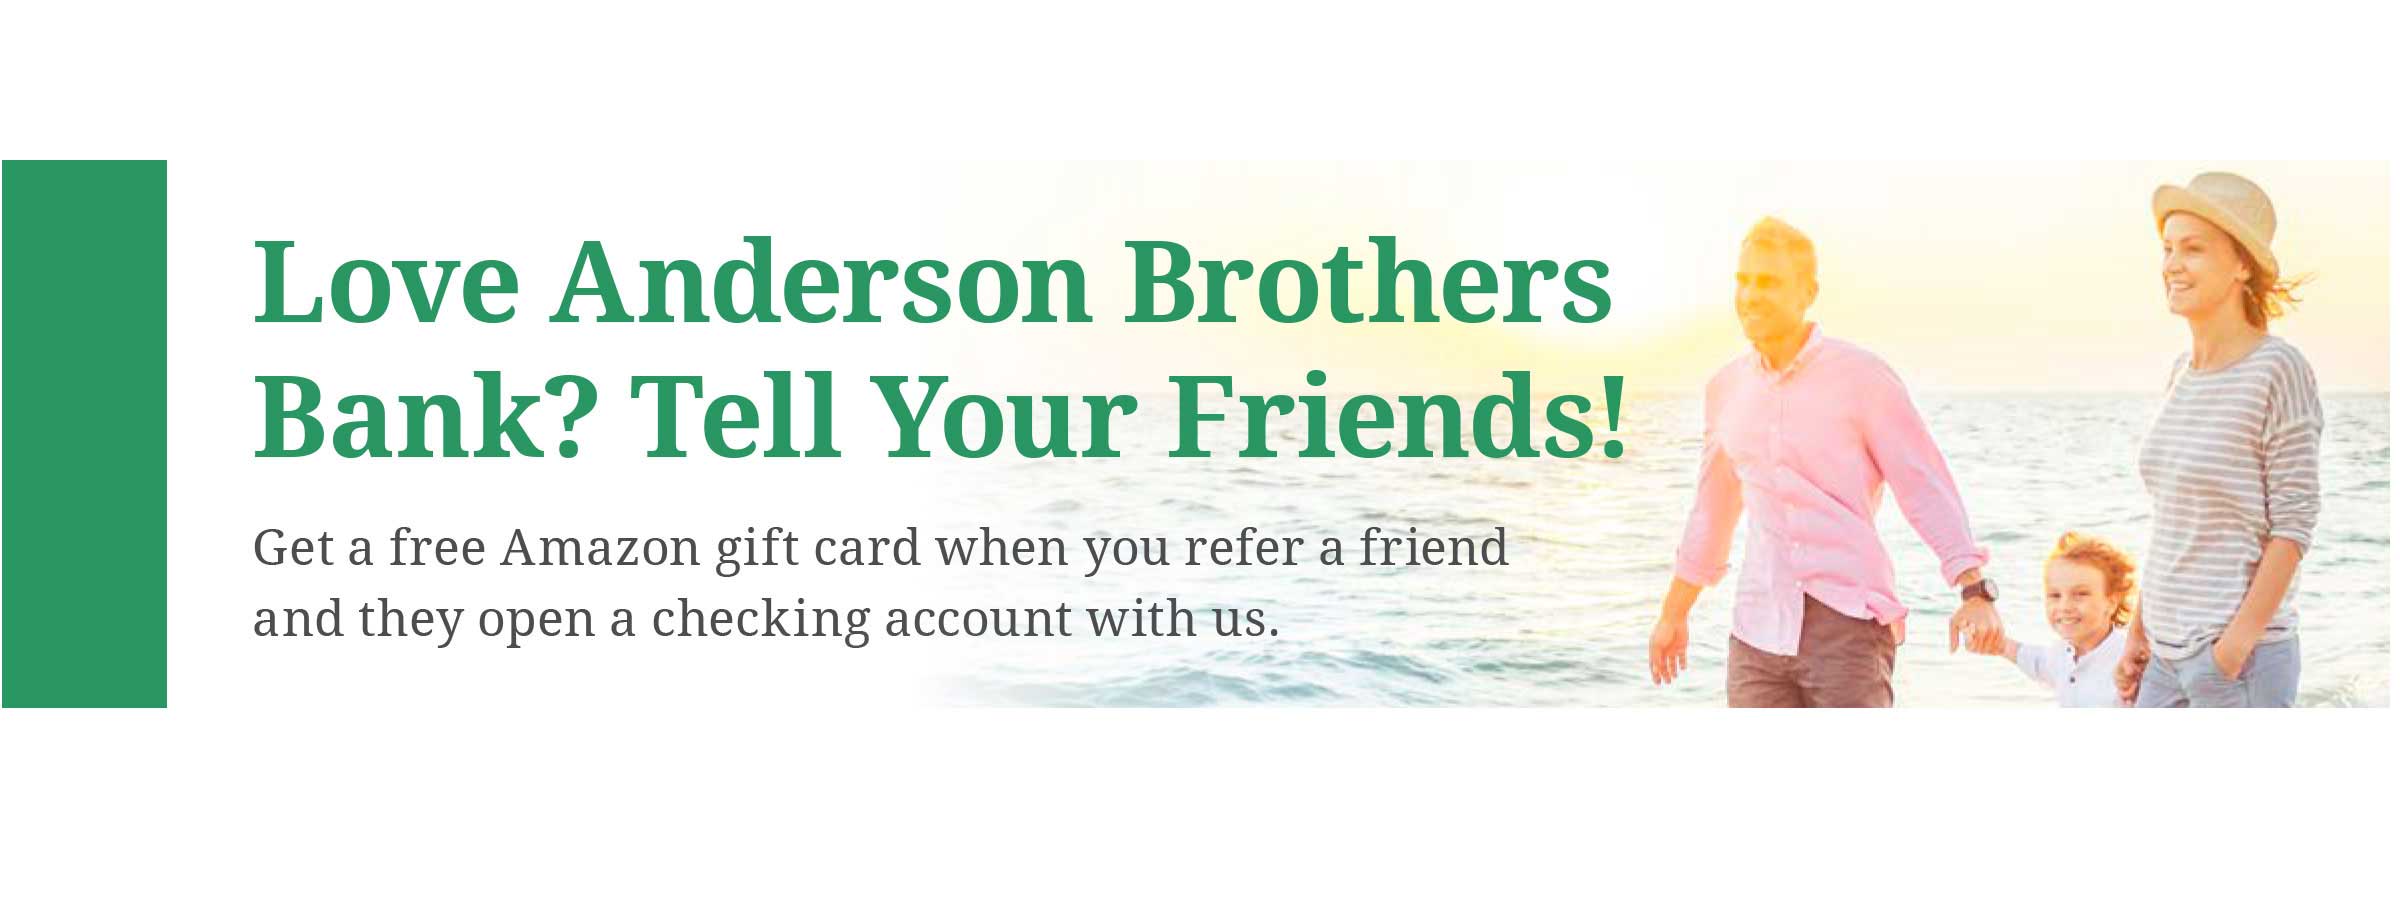 Referral message for ABB.
Tell your friends about ABB and get a gift card.